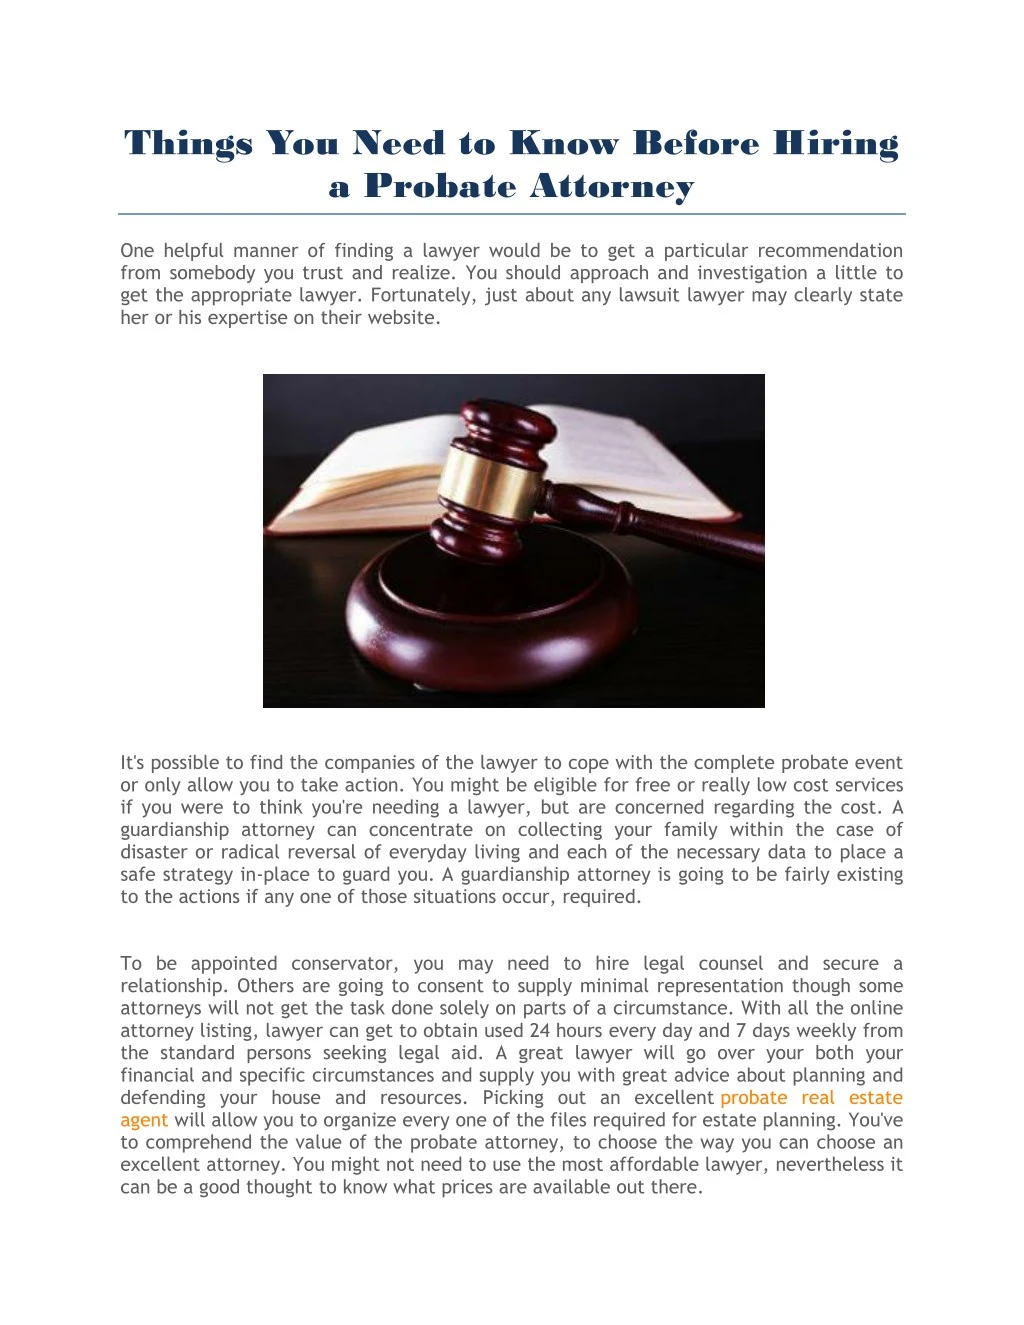 things you need to know before hiring a probate